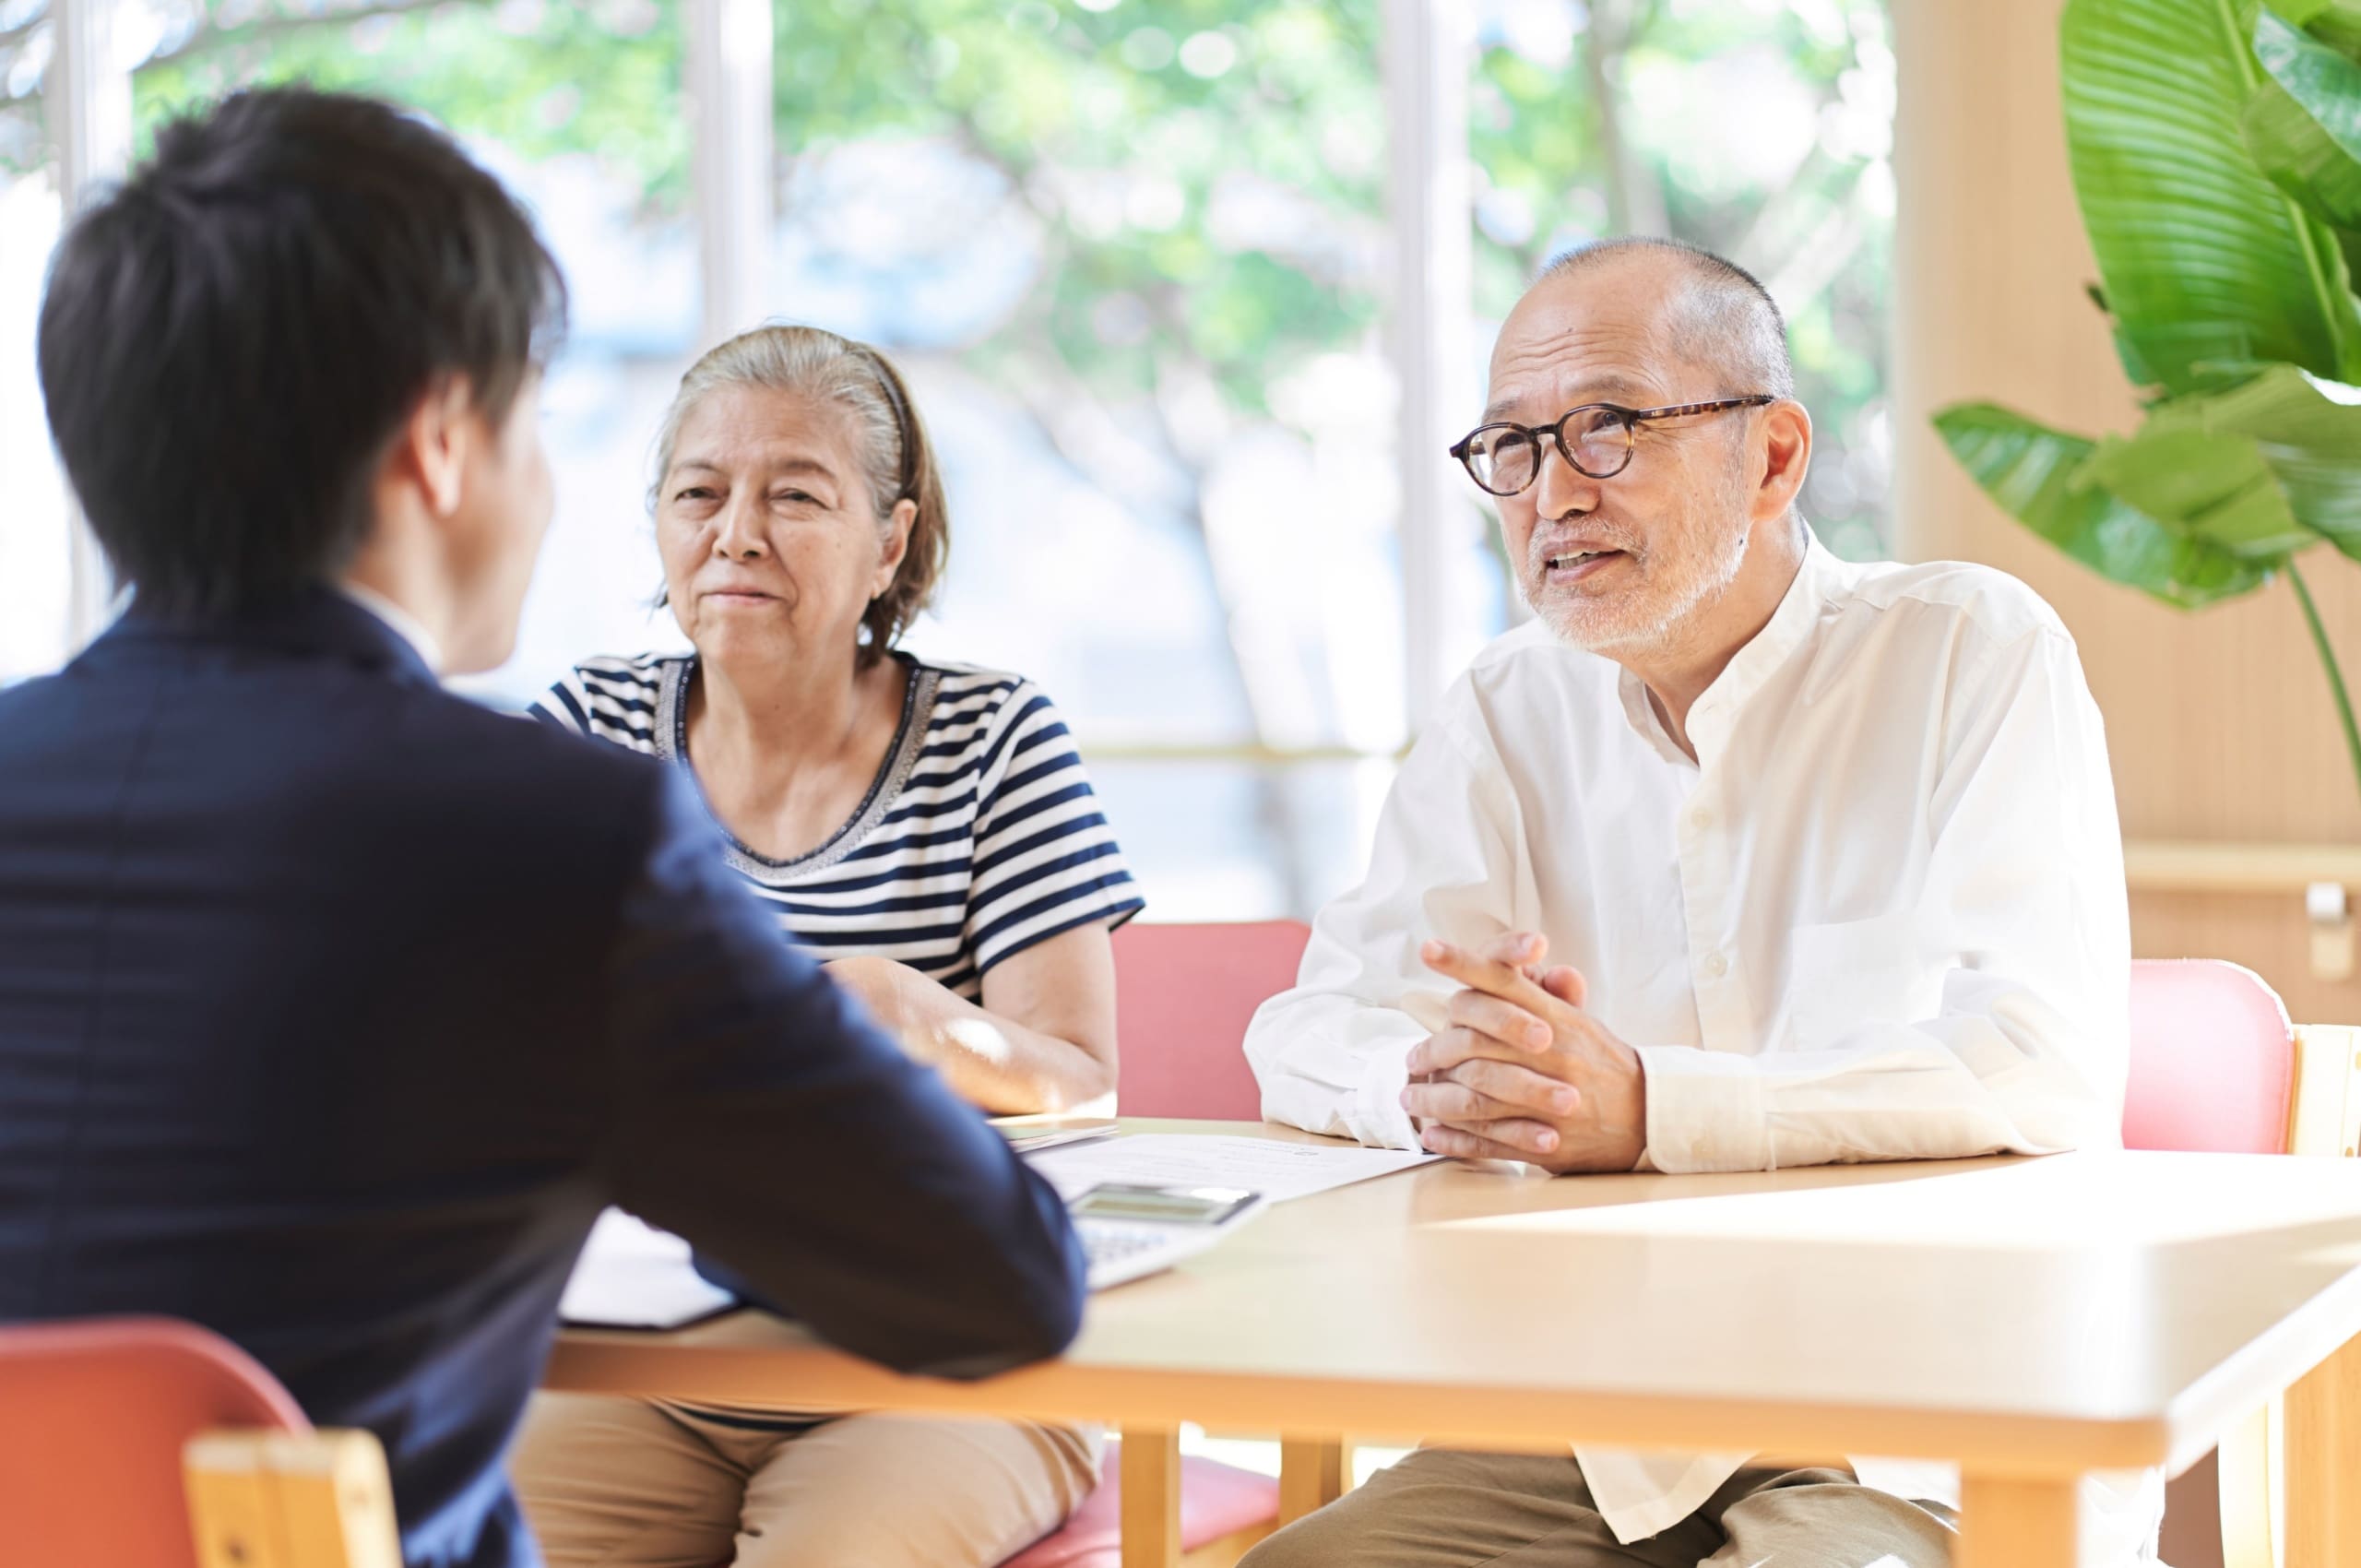 Have you overlooked speaking to your beneficiaries as part of your estate plan?